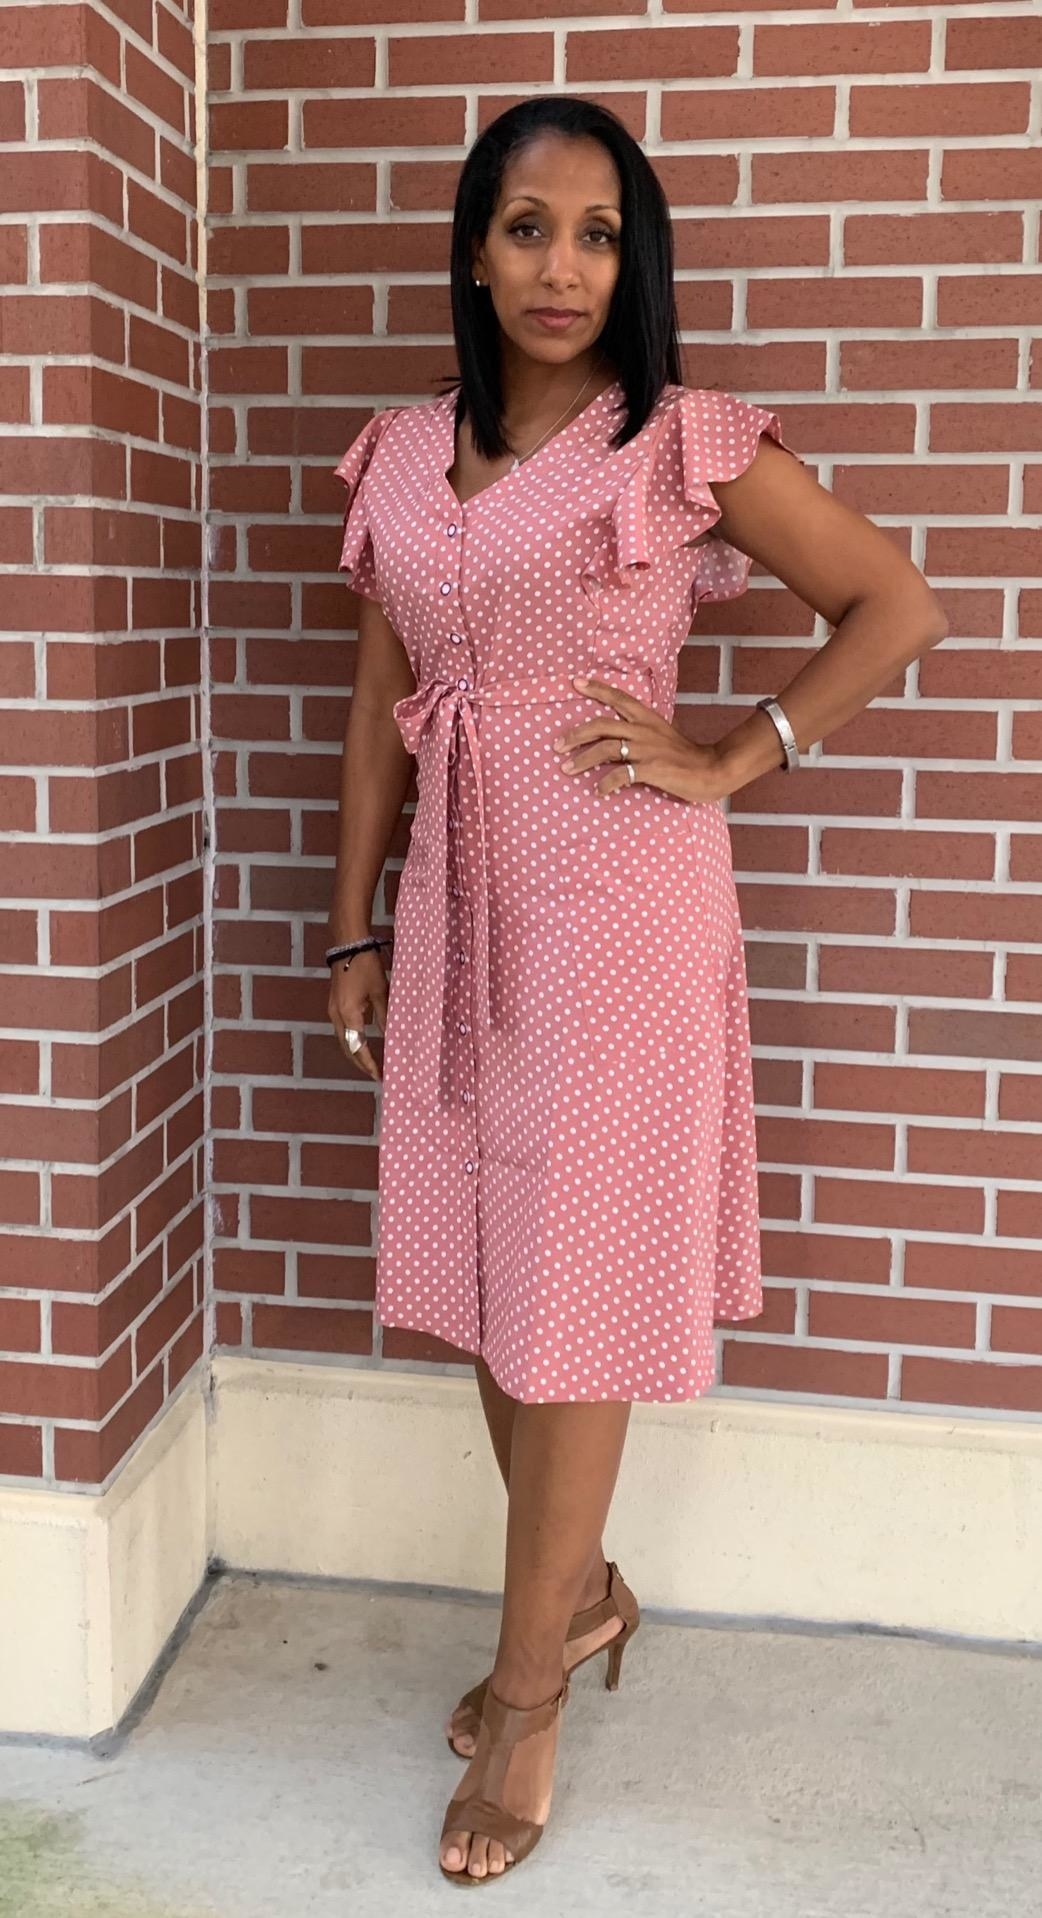 A reviewer photo of the dress in pink polka dot